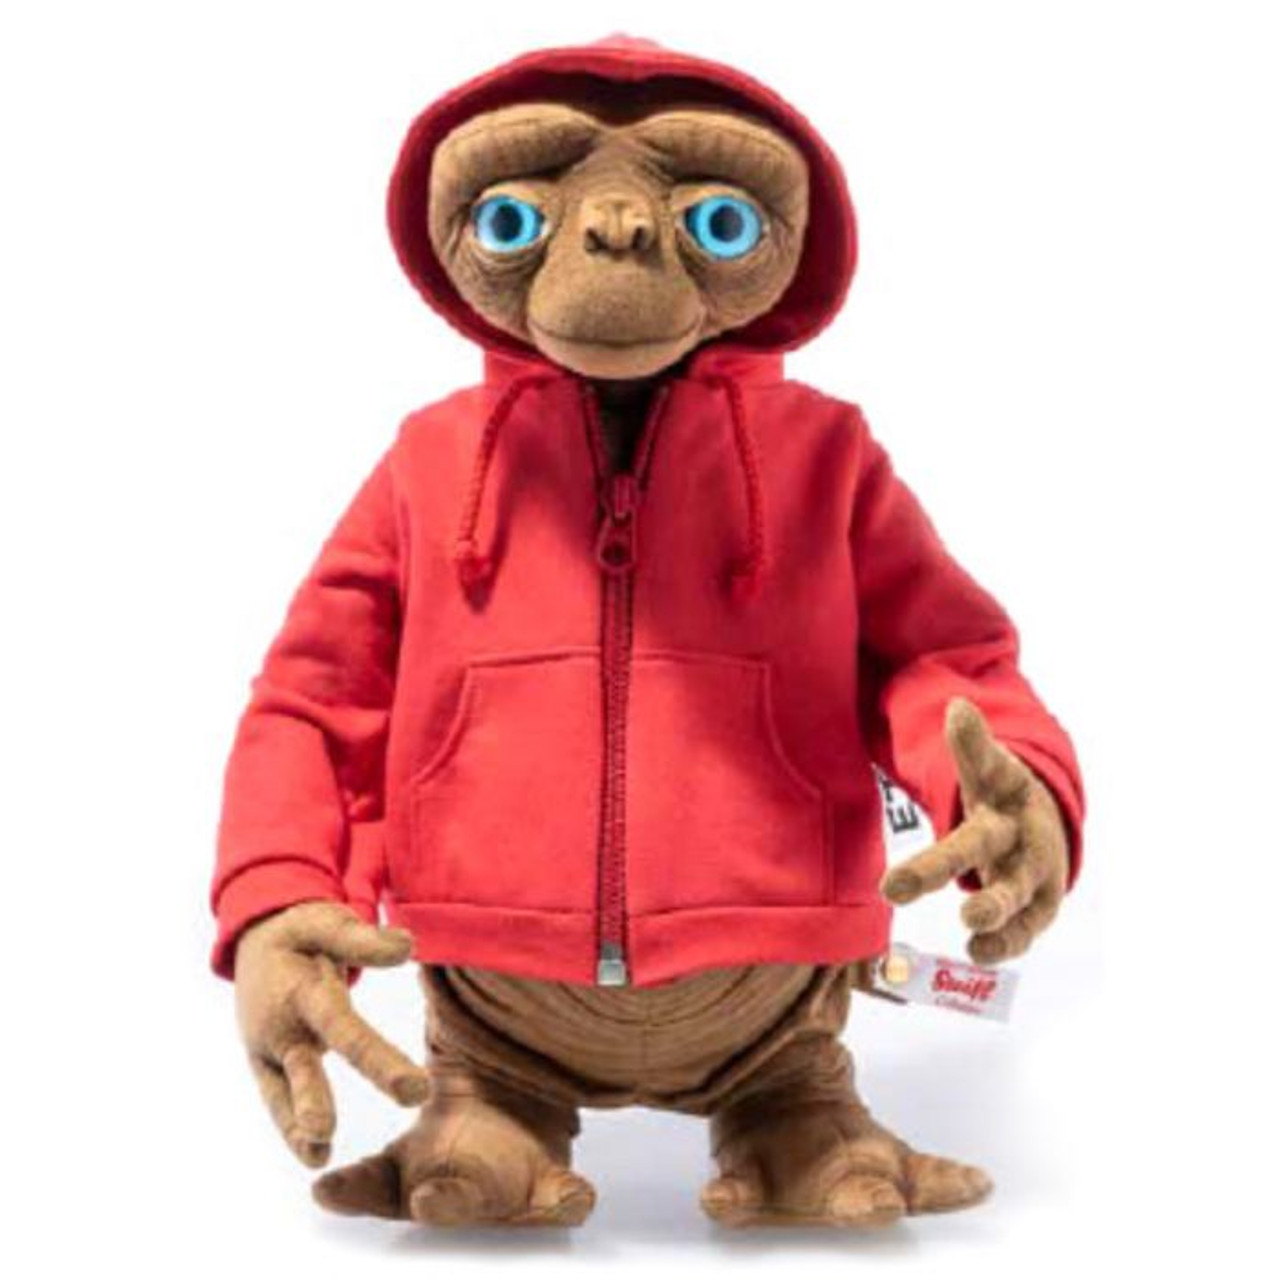 ET the Extra-Terrestrial Steiff Limited Edition EAN 355899